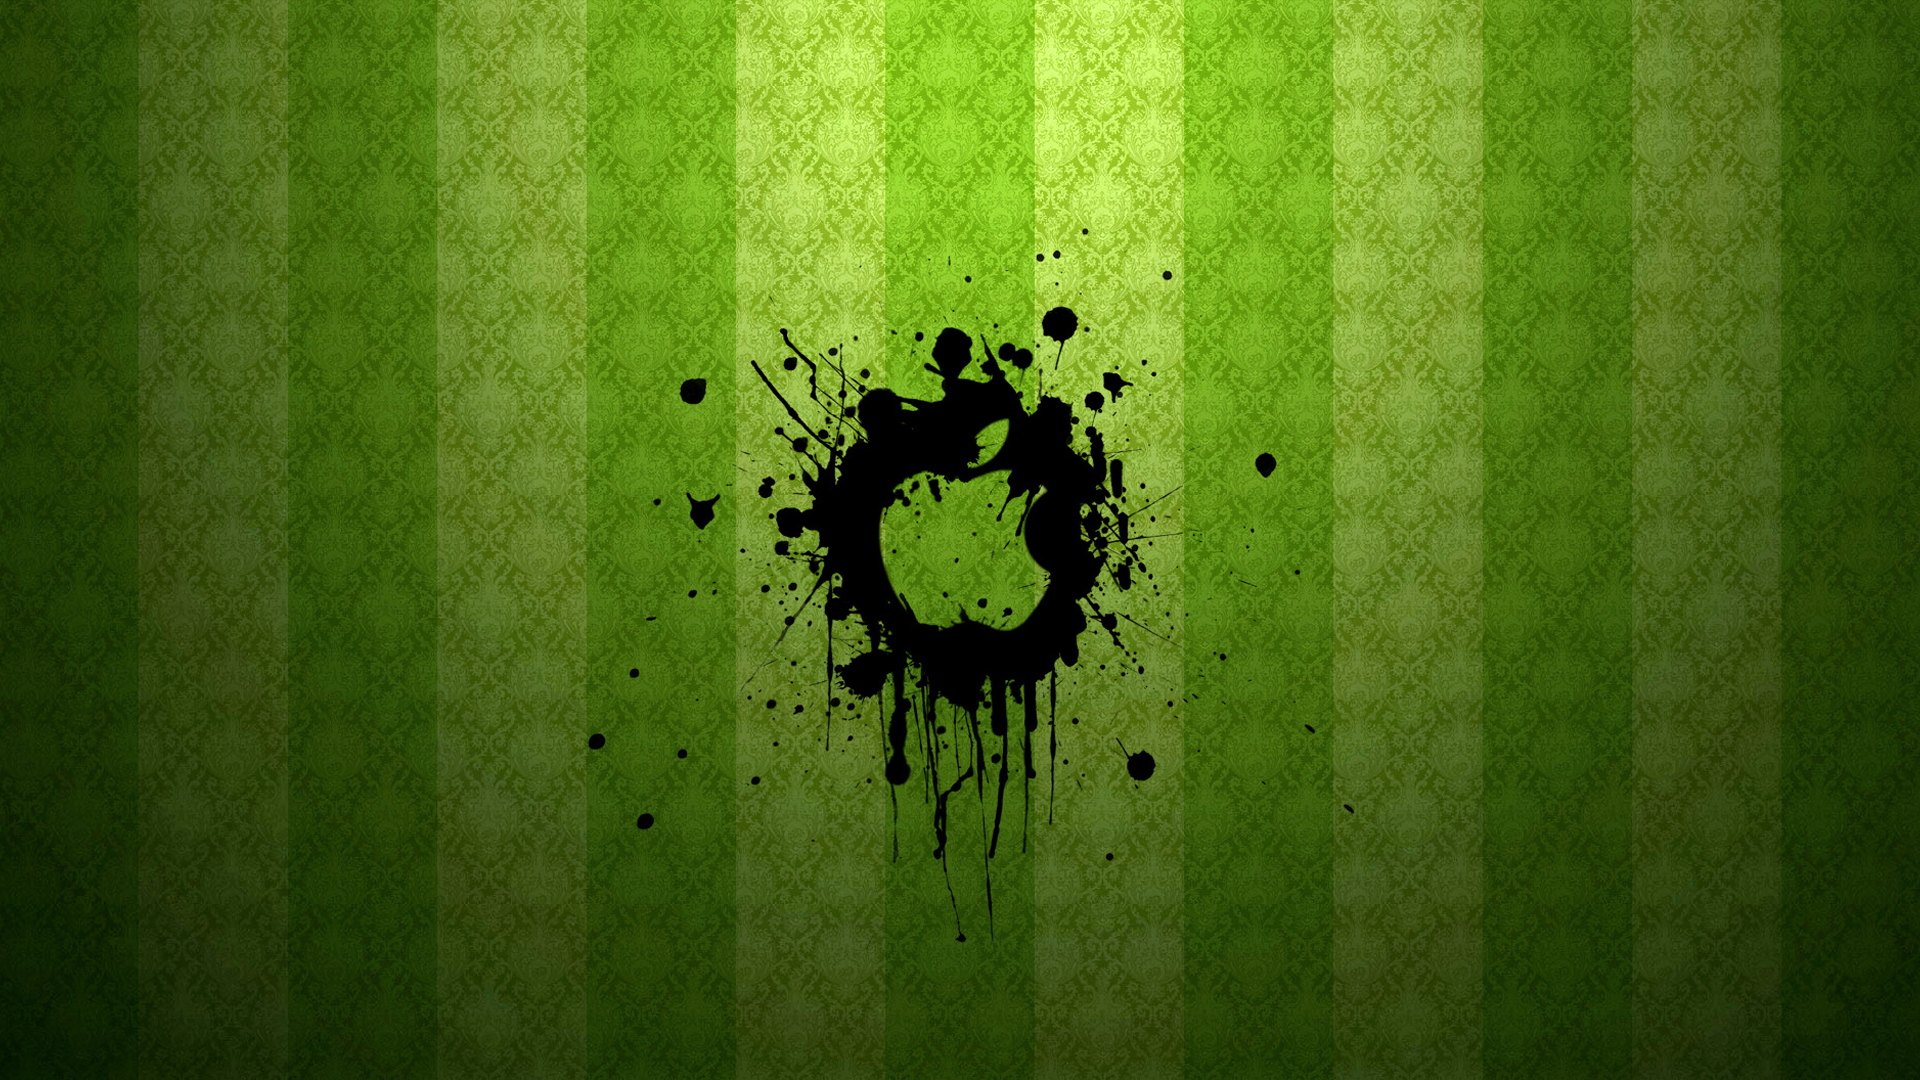 Apple Graffiti Theme Wallpaper Green Background Pictures And Image